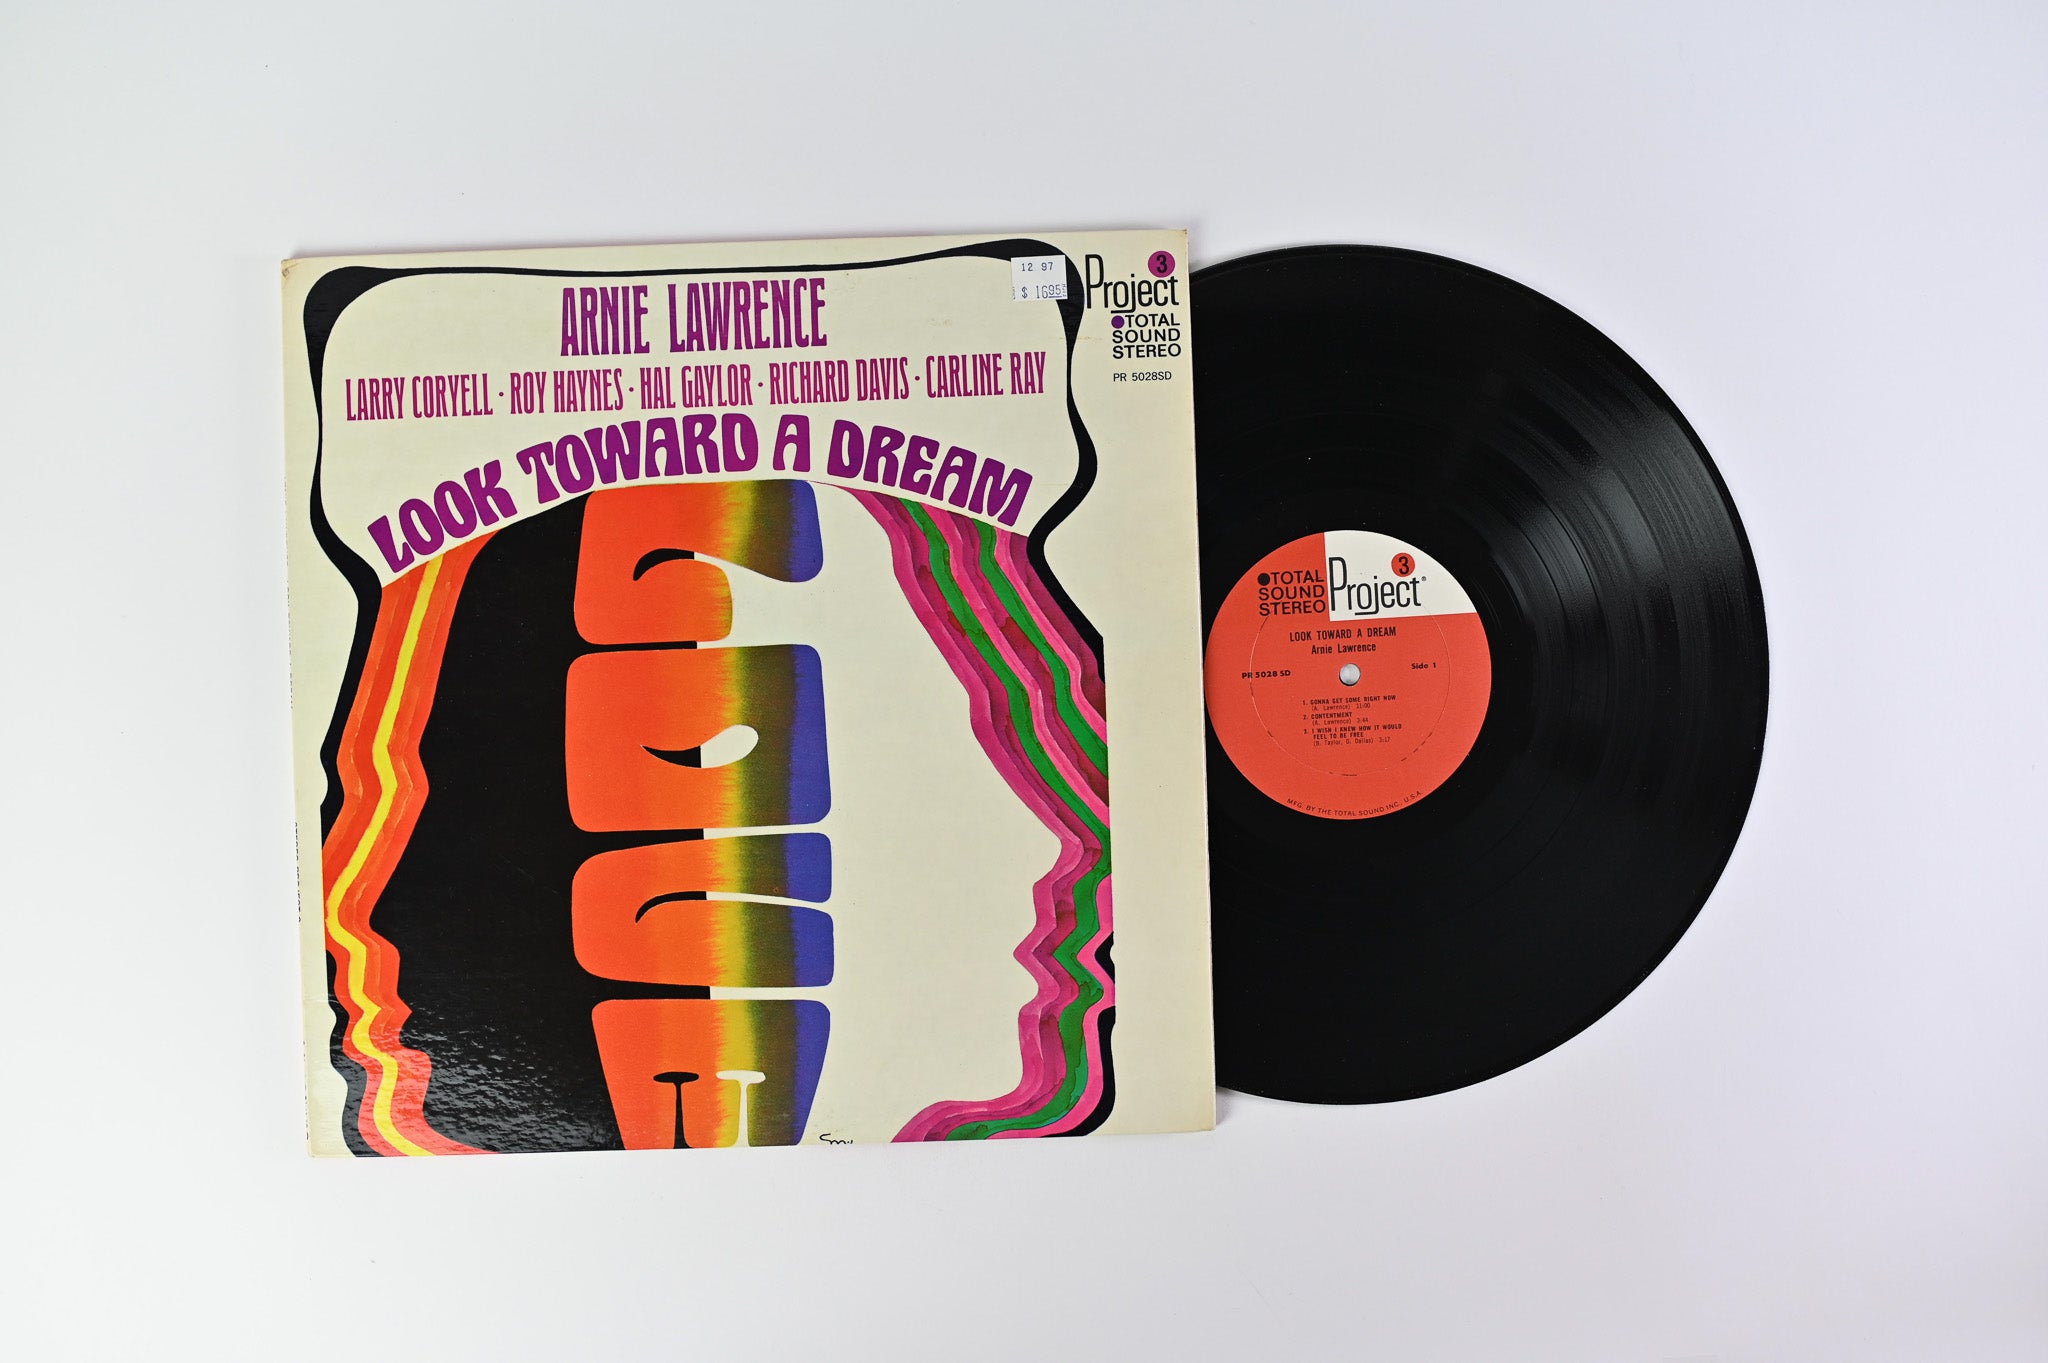 Arnie Lawrence - Look Toward A Dream on Project 3